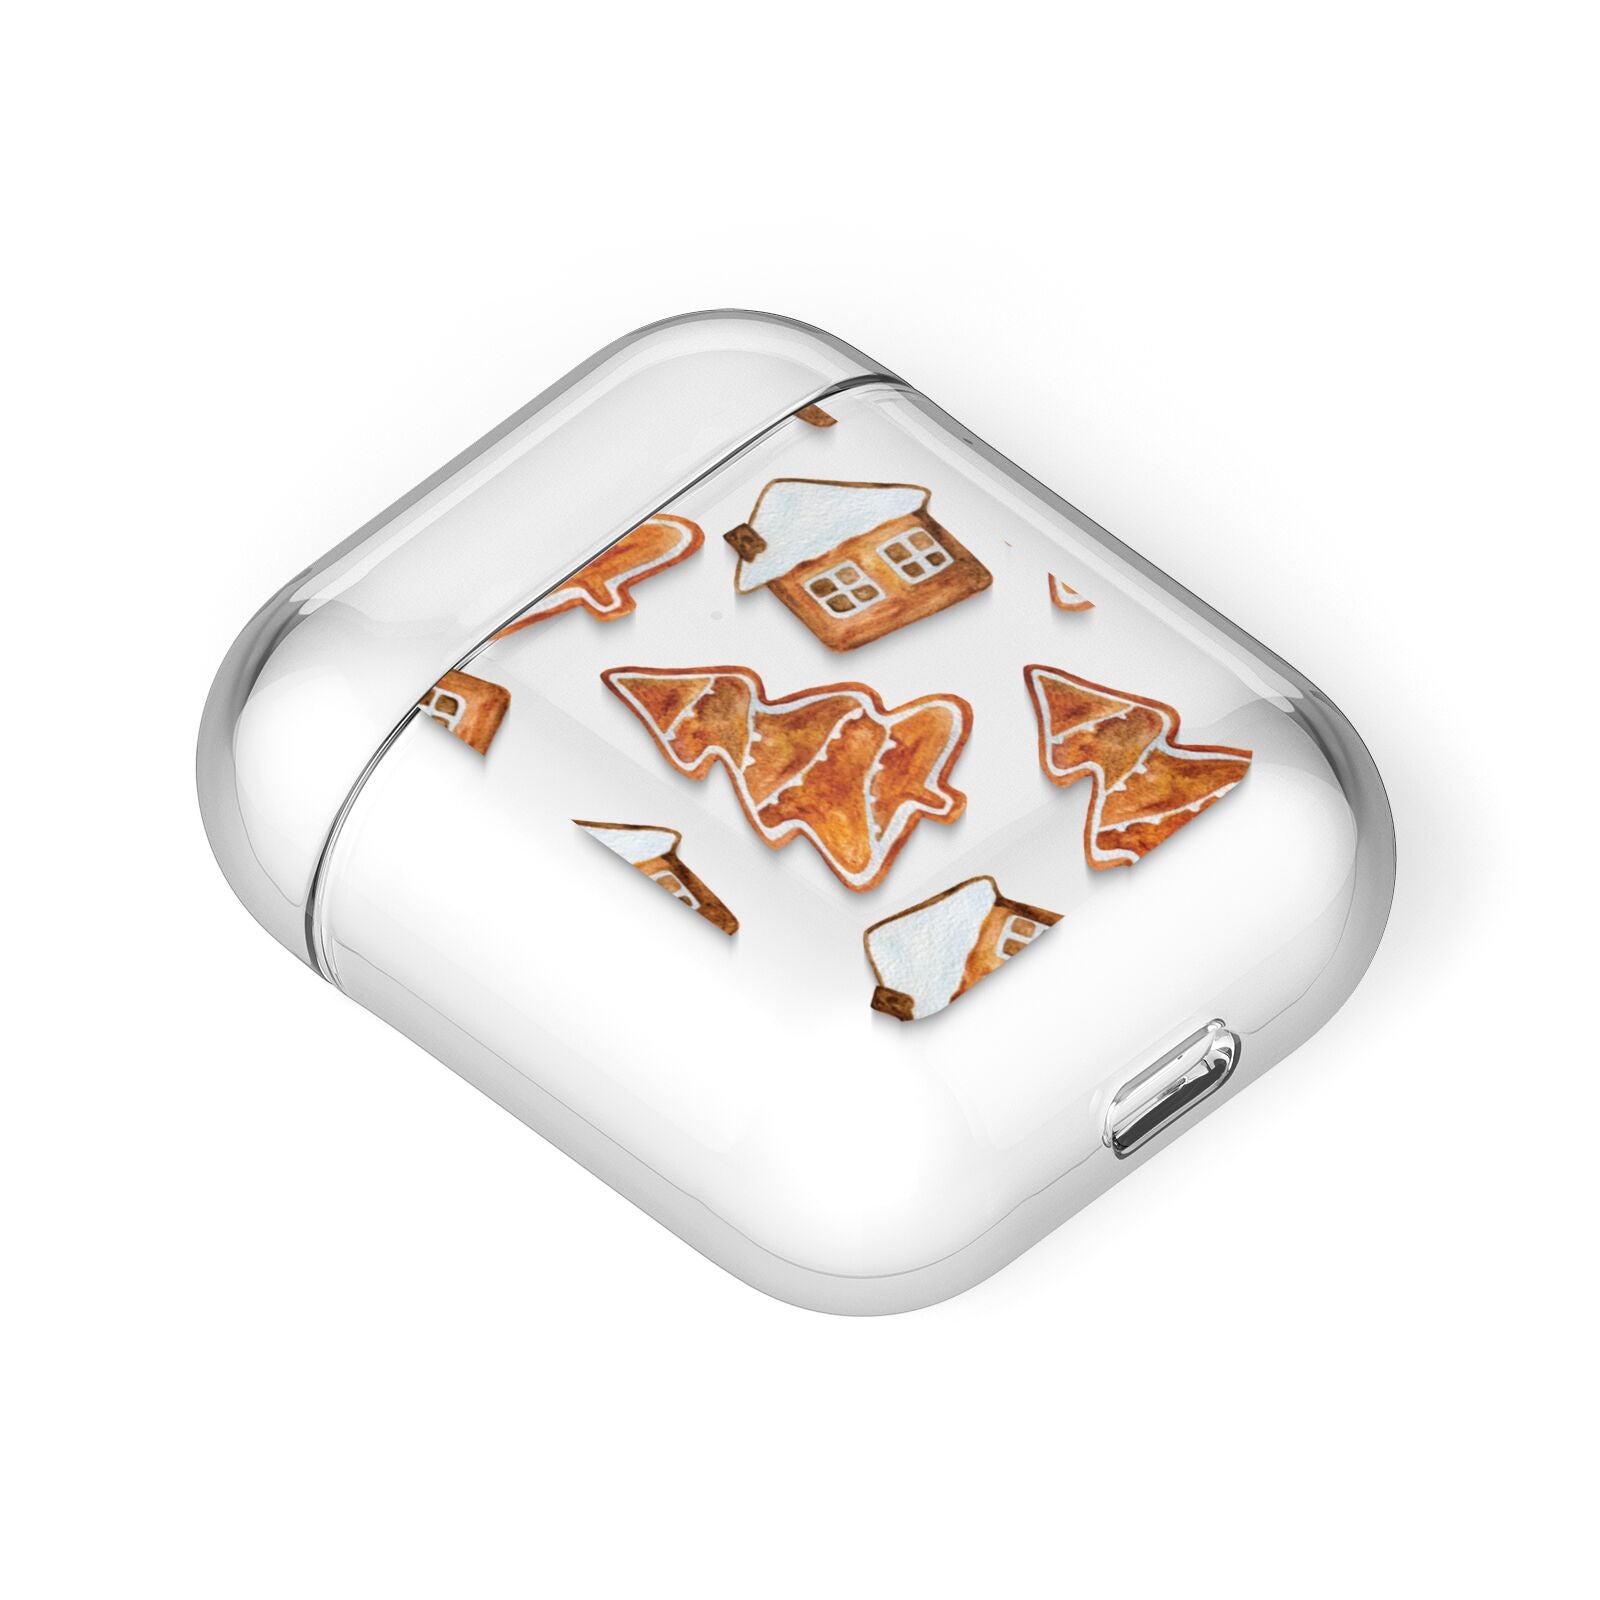 Gingerbread House Tree AirPods Case Laid Flat